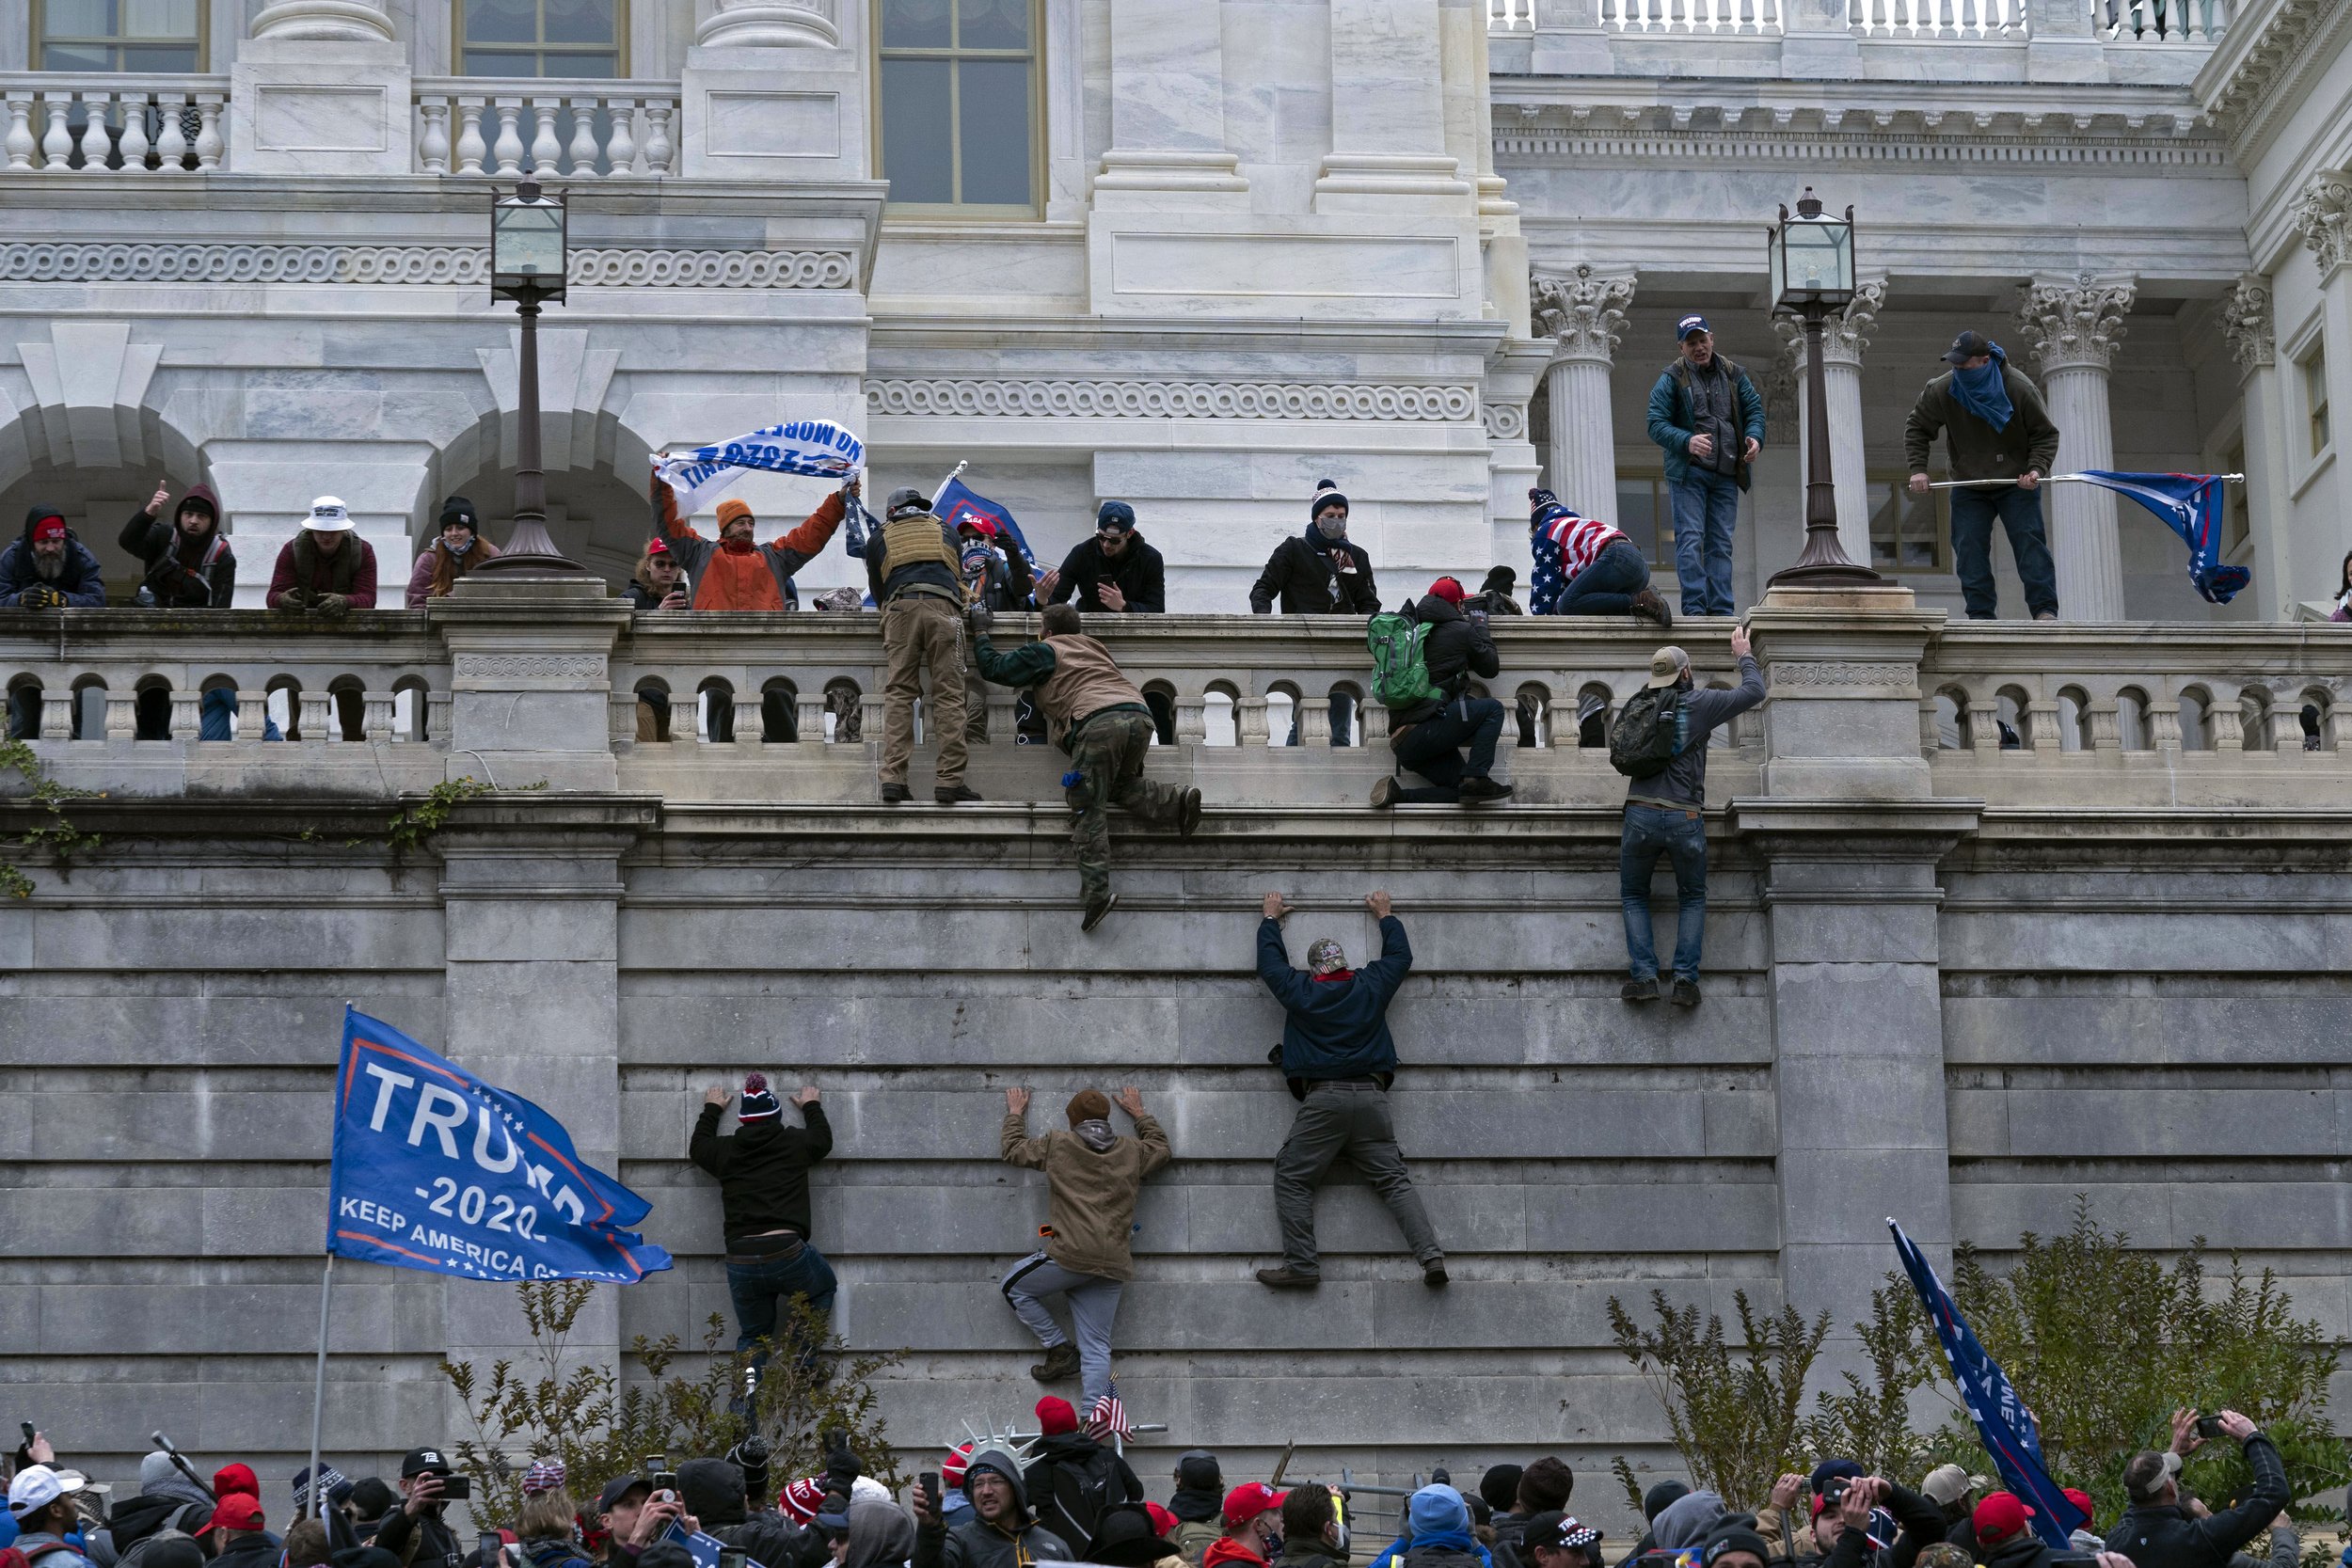  Supporters of President Donald Trump climb the west wall of the the U.S. Capitol in Washington as they try to storm the building on Jan. 6, 2021, while inside Congress prepared to affirm President-elect Joe Biden's election victory. (AP Photo/Jose L